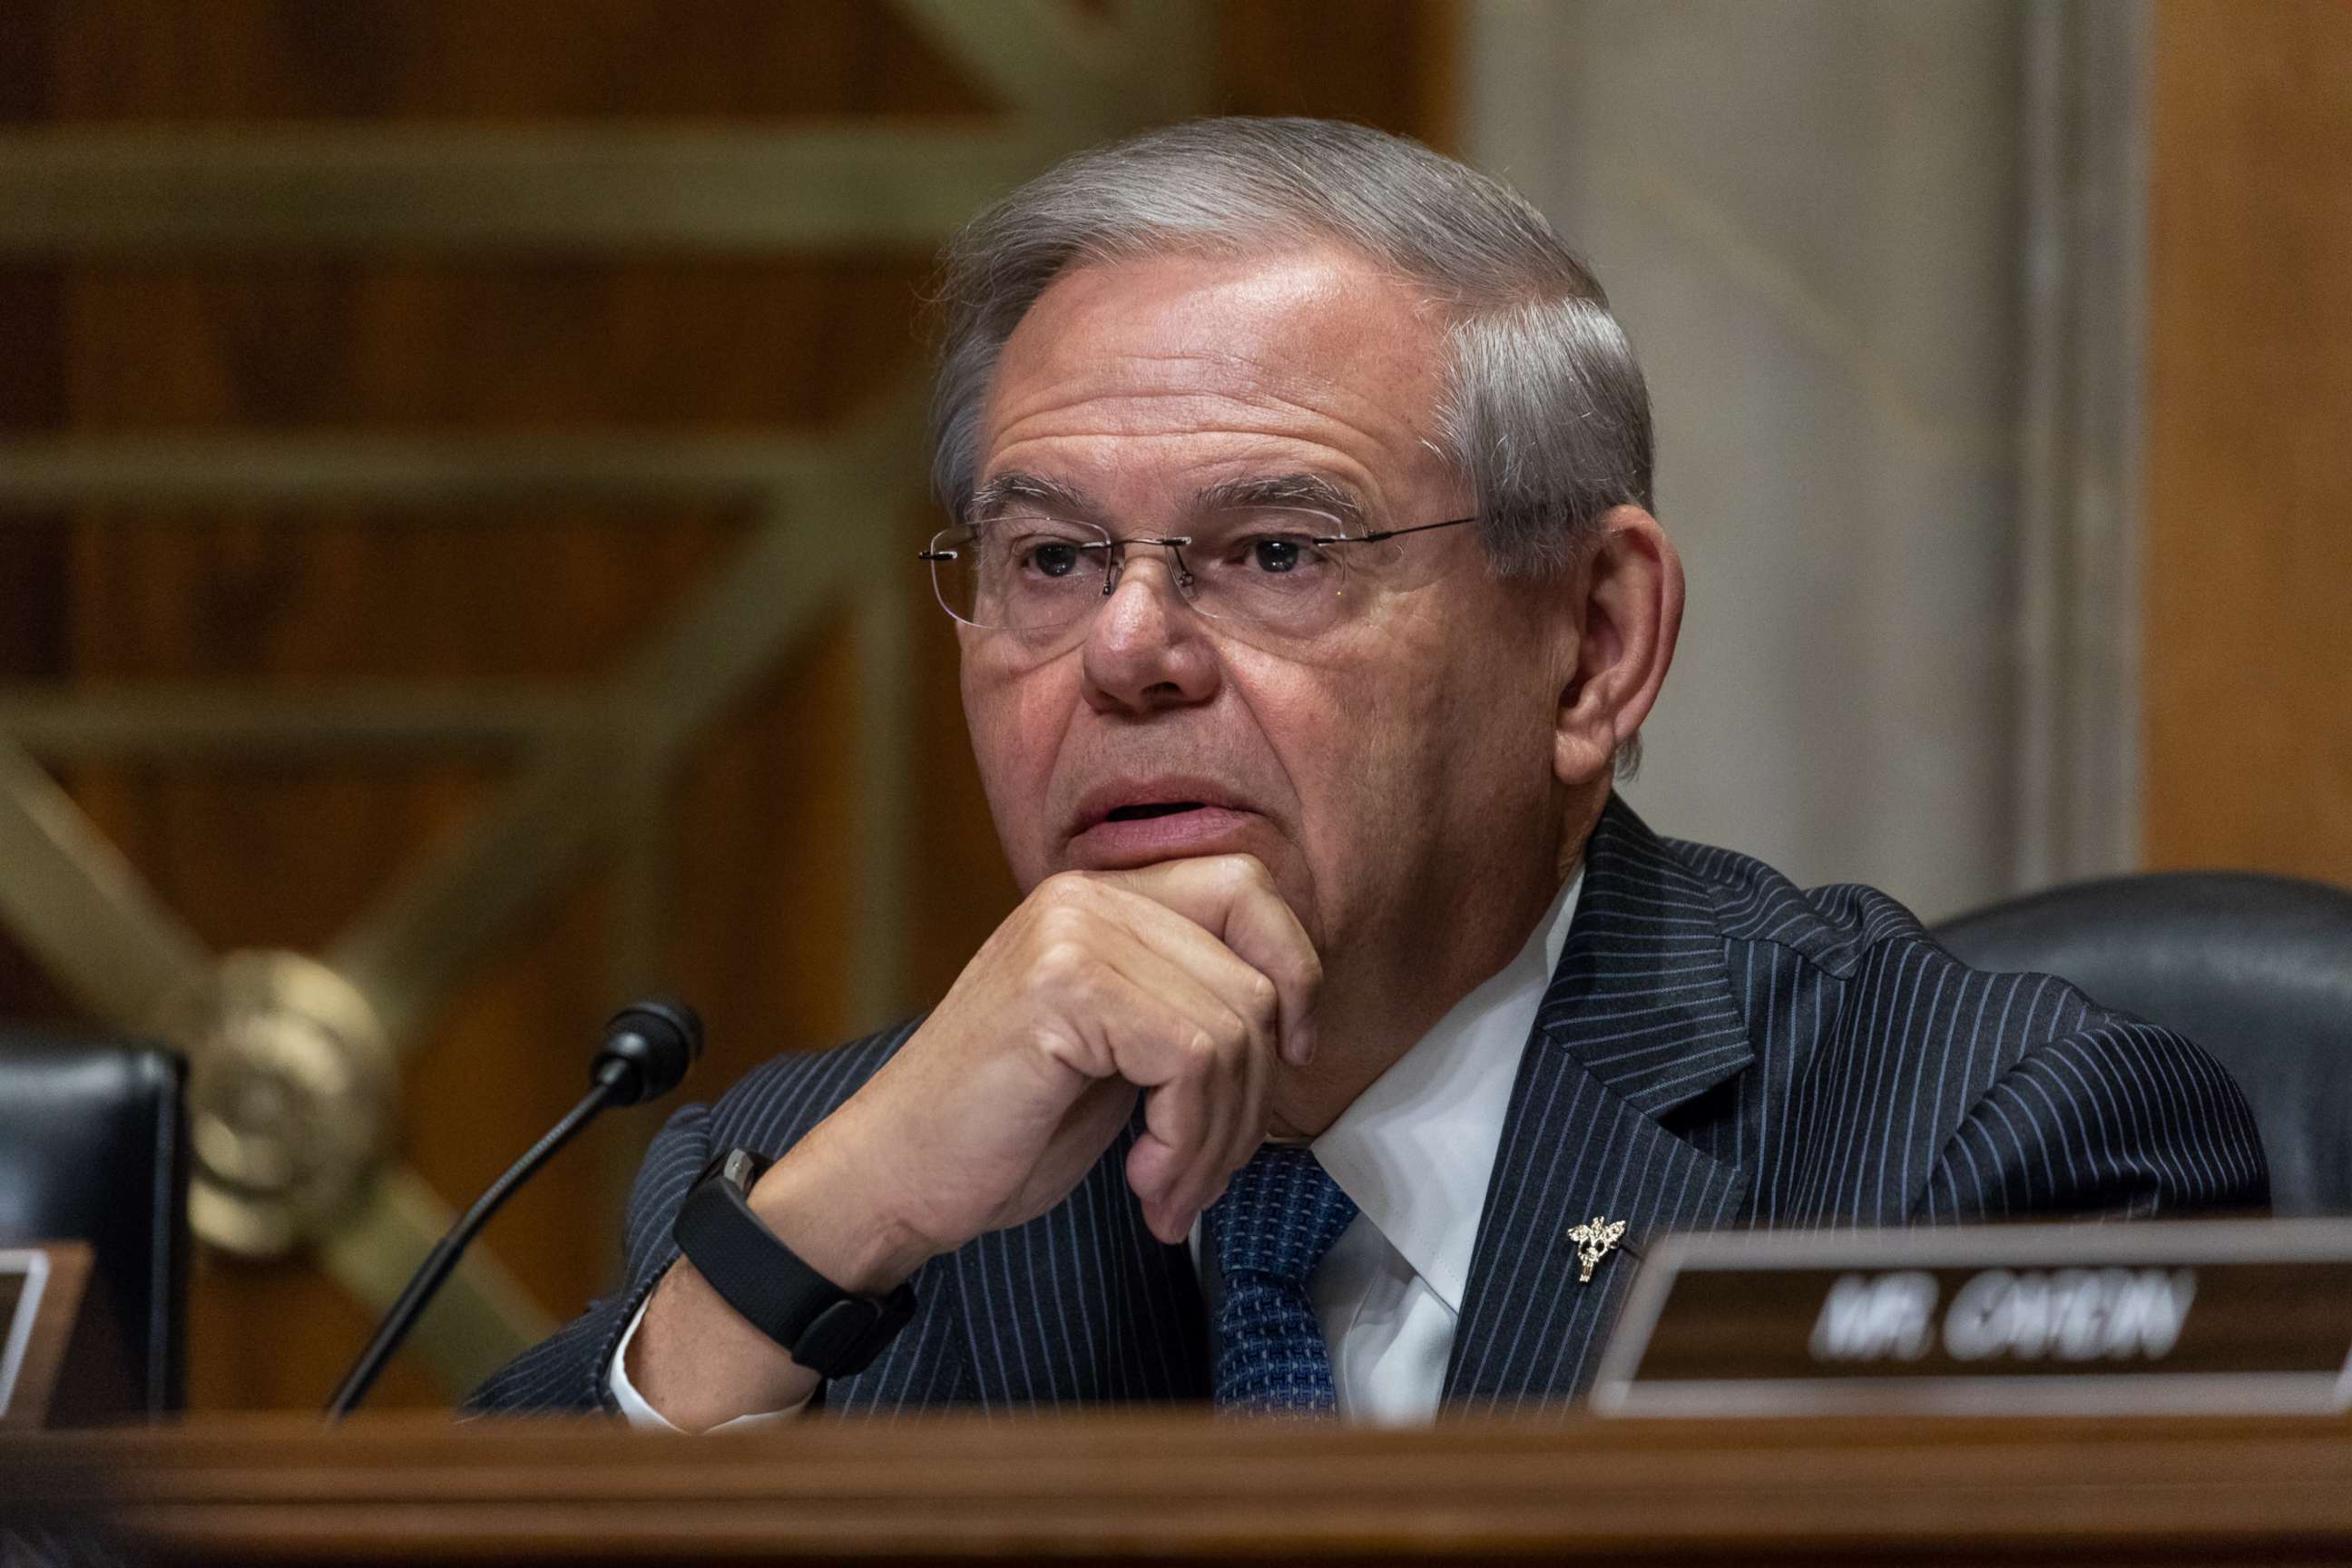 PHOTO: Senator Bob Menendez is pictured during a Senate Foreign Relations Committee confirmation hearing on Capitol Hill in Washington, April 12, 2018.